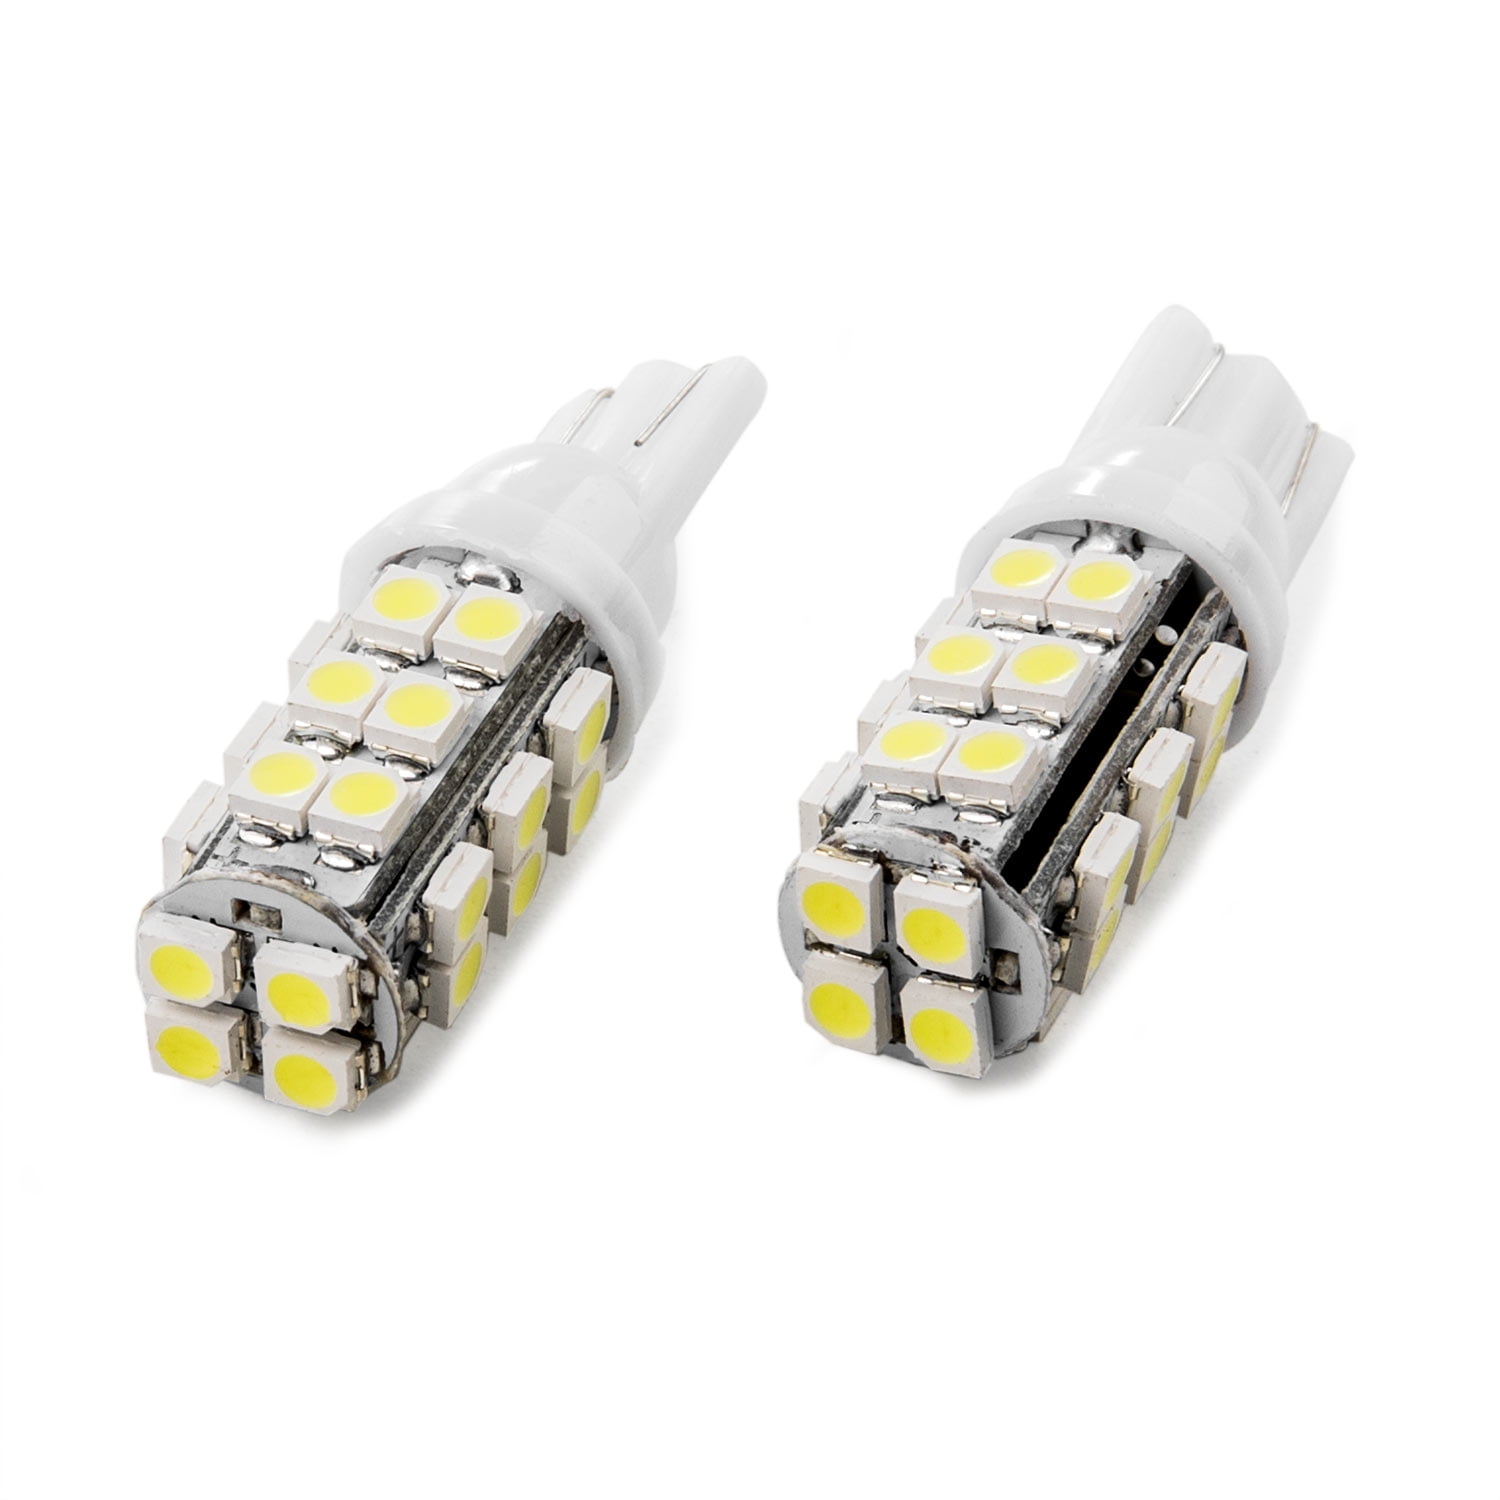 NEW 2x 168 194 T10 6000K LED Replacement Light Bulbs for 2013 Infiniti JX35 